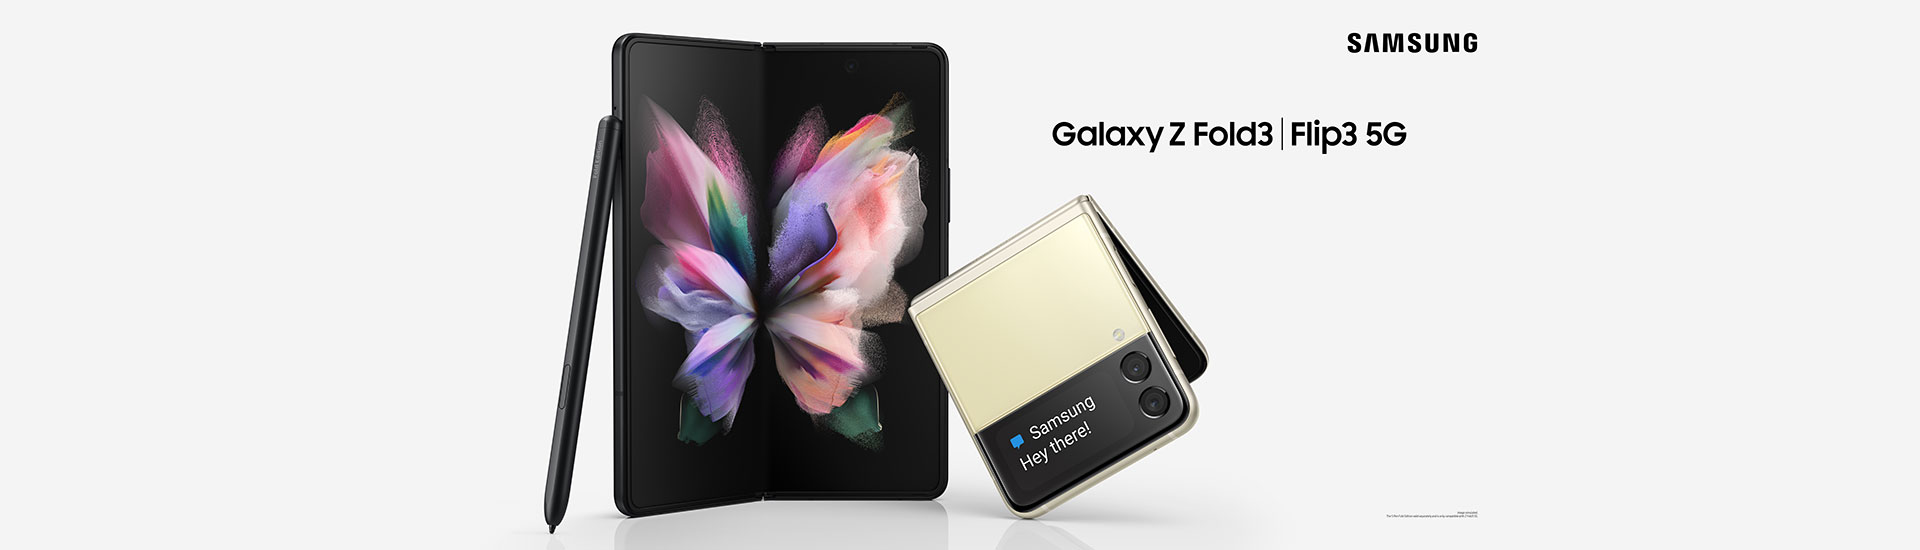 Galaxy Z Fold3 5G enjoy to free premiums (Total value $1,796). Galaxy Z Flip3 5G enjoy to free Silicone Cover with Strap (value $398). $7,500 discount upon subscribe Newest 5G Infinity Data Bundle Offer.